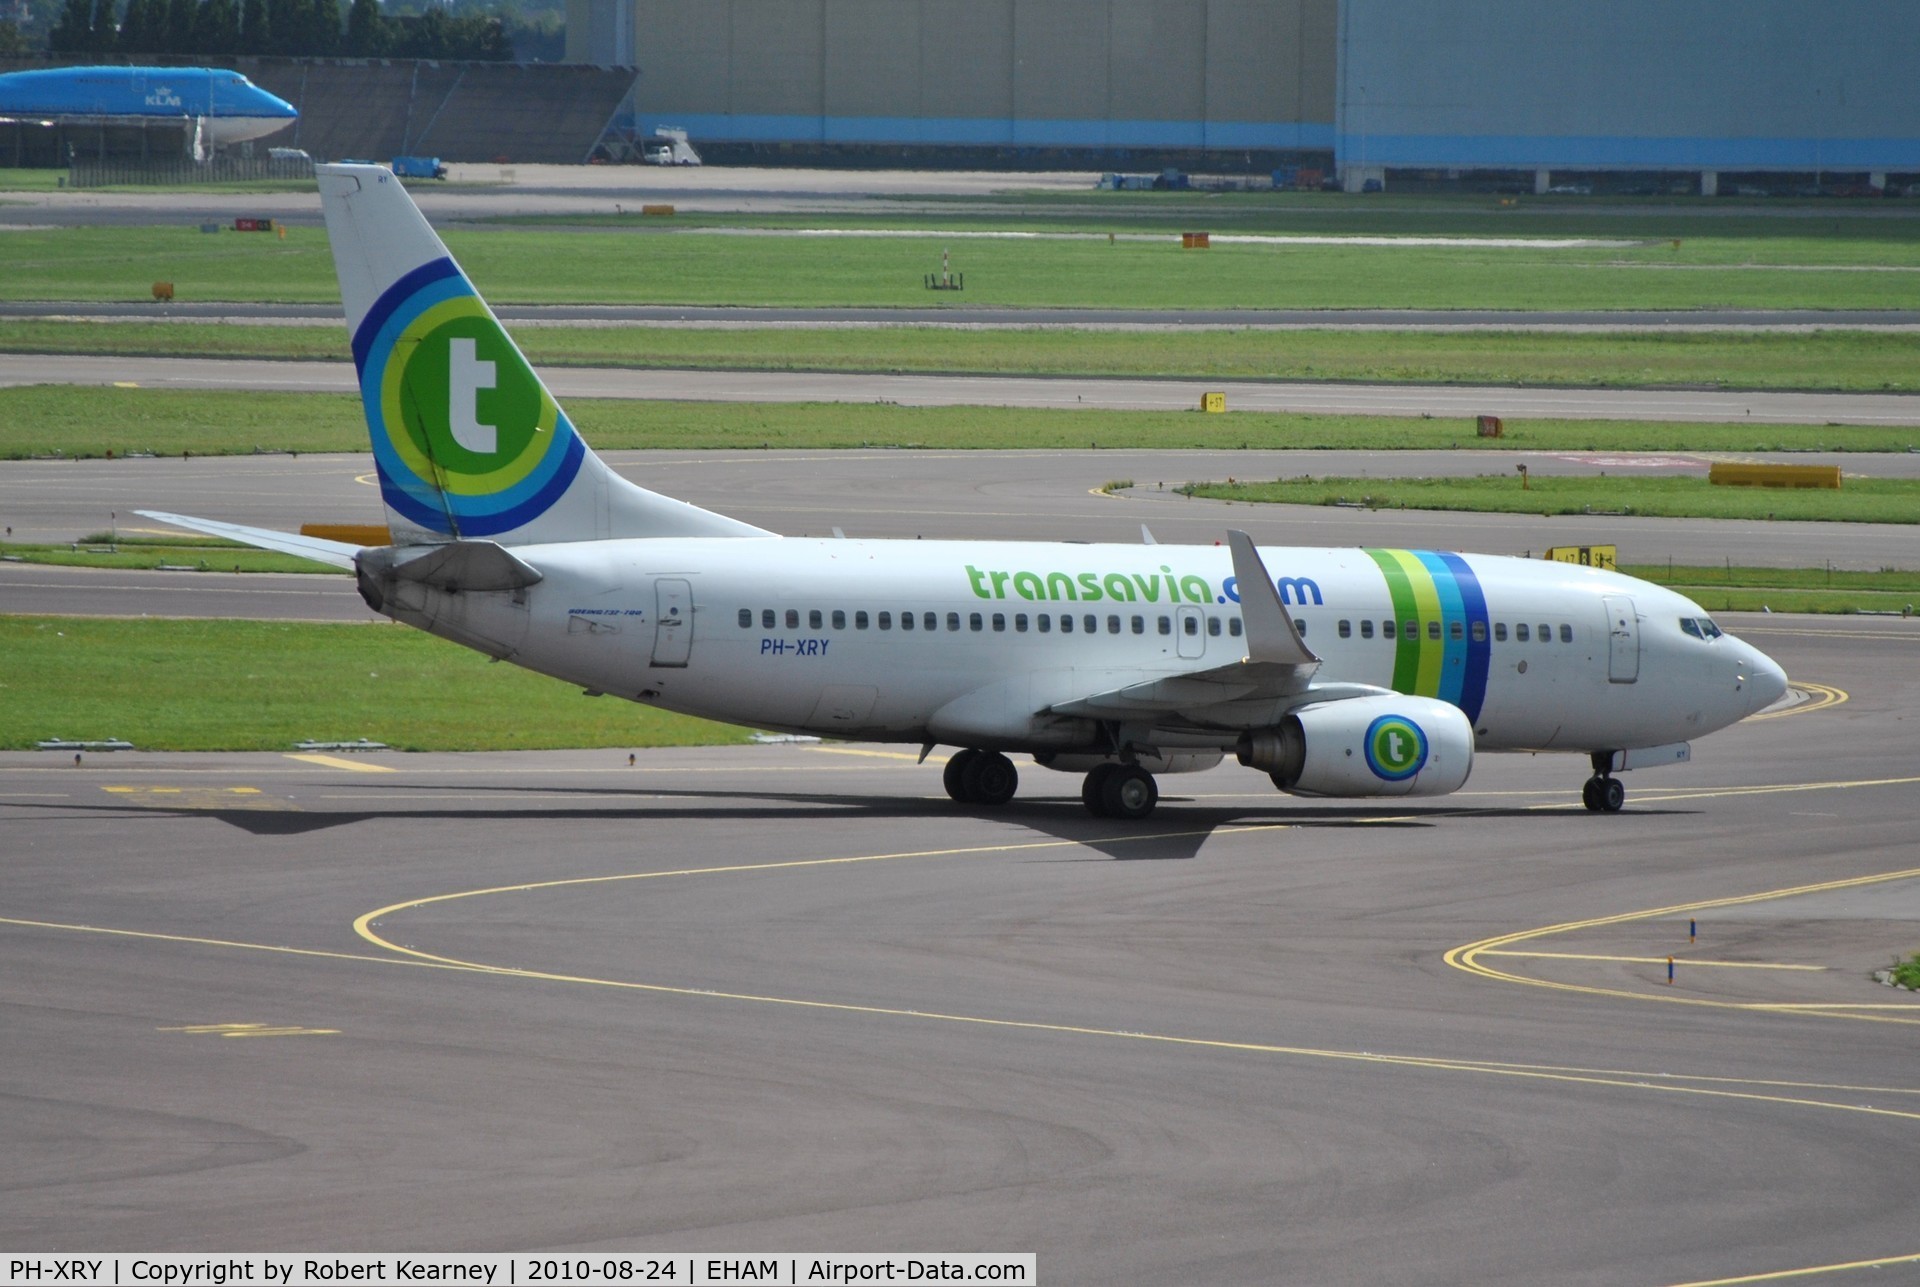 PH-XRY, 2003 Boeing 737-7K2 C/N 33463, Transavia taxiing out for departure